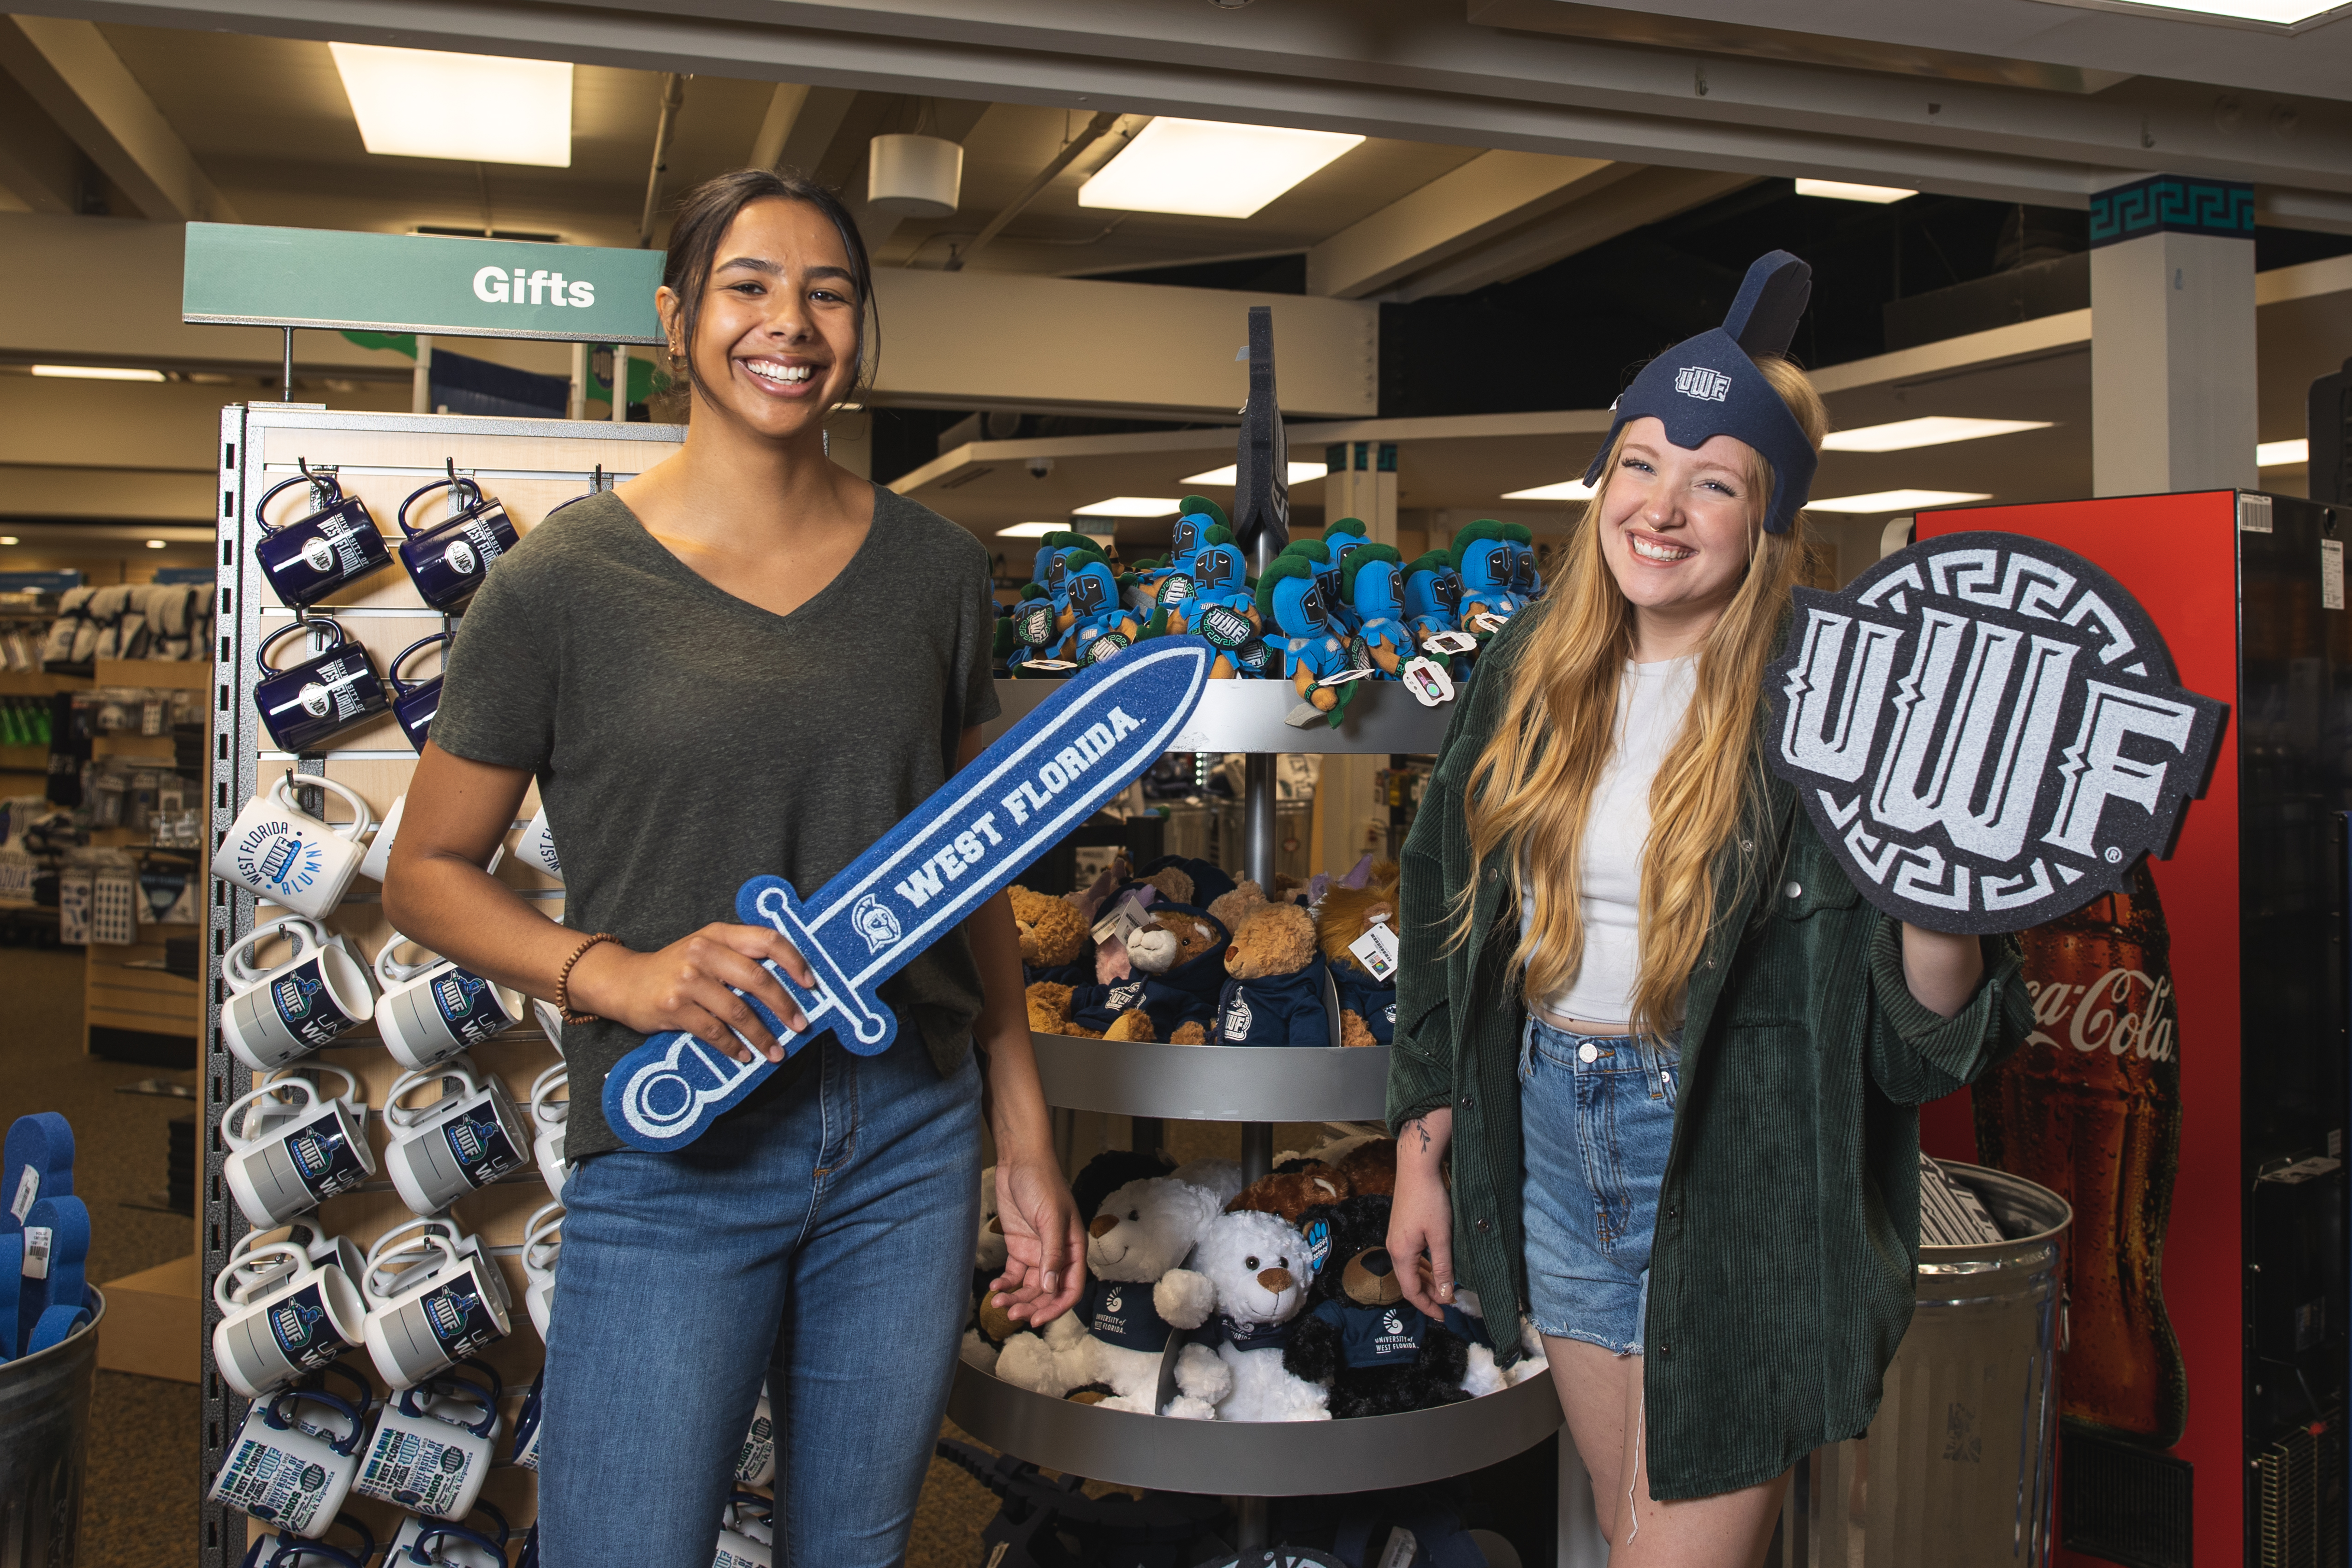 Students shopping in UWF Bookstore